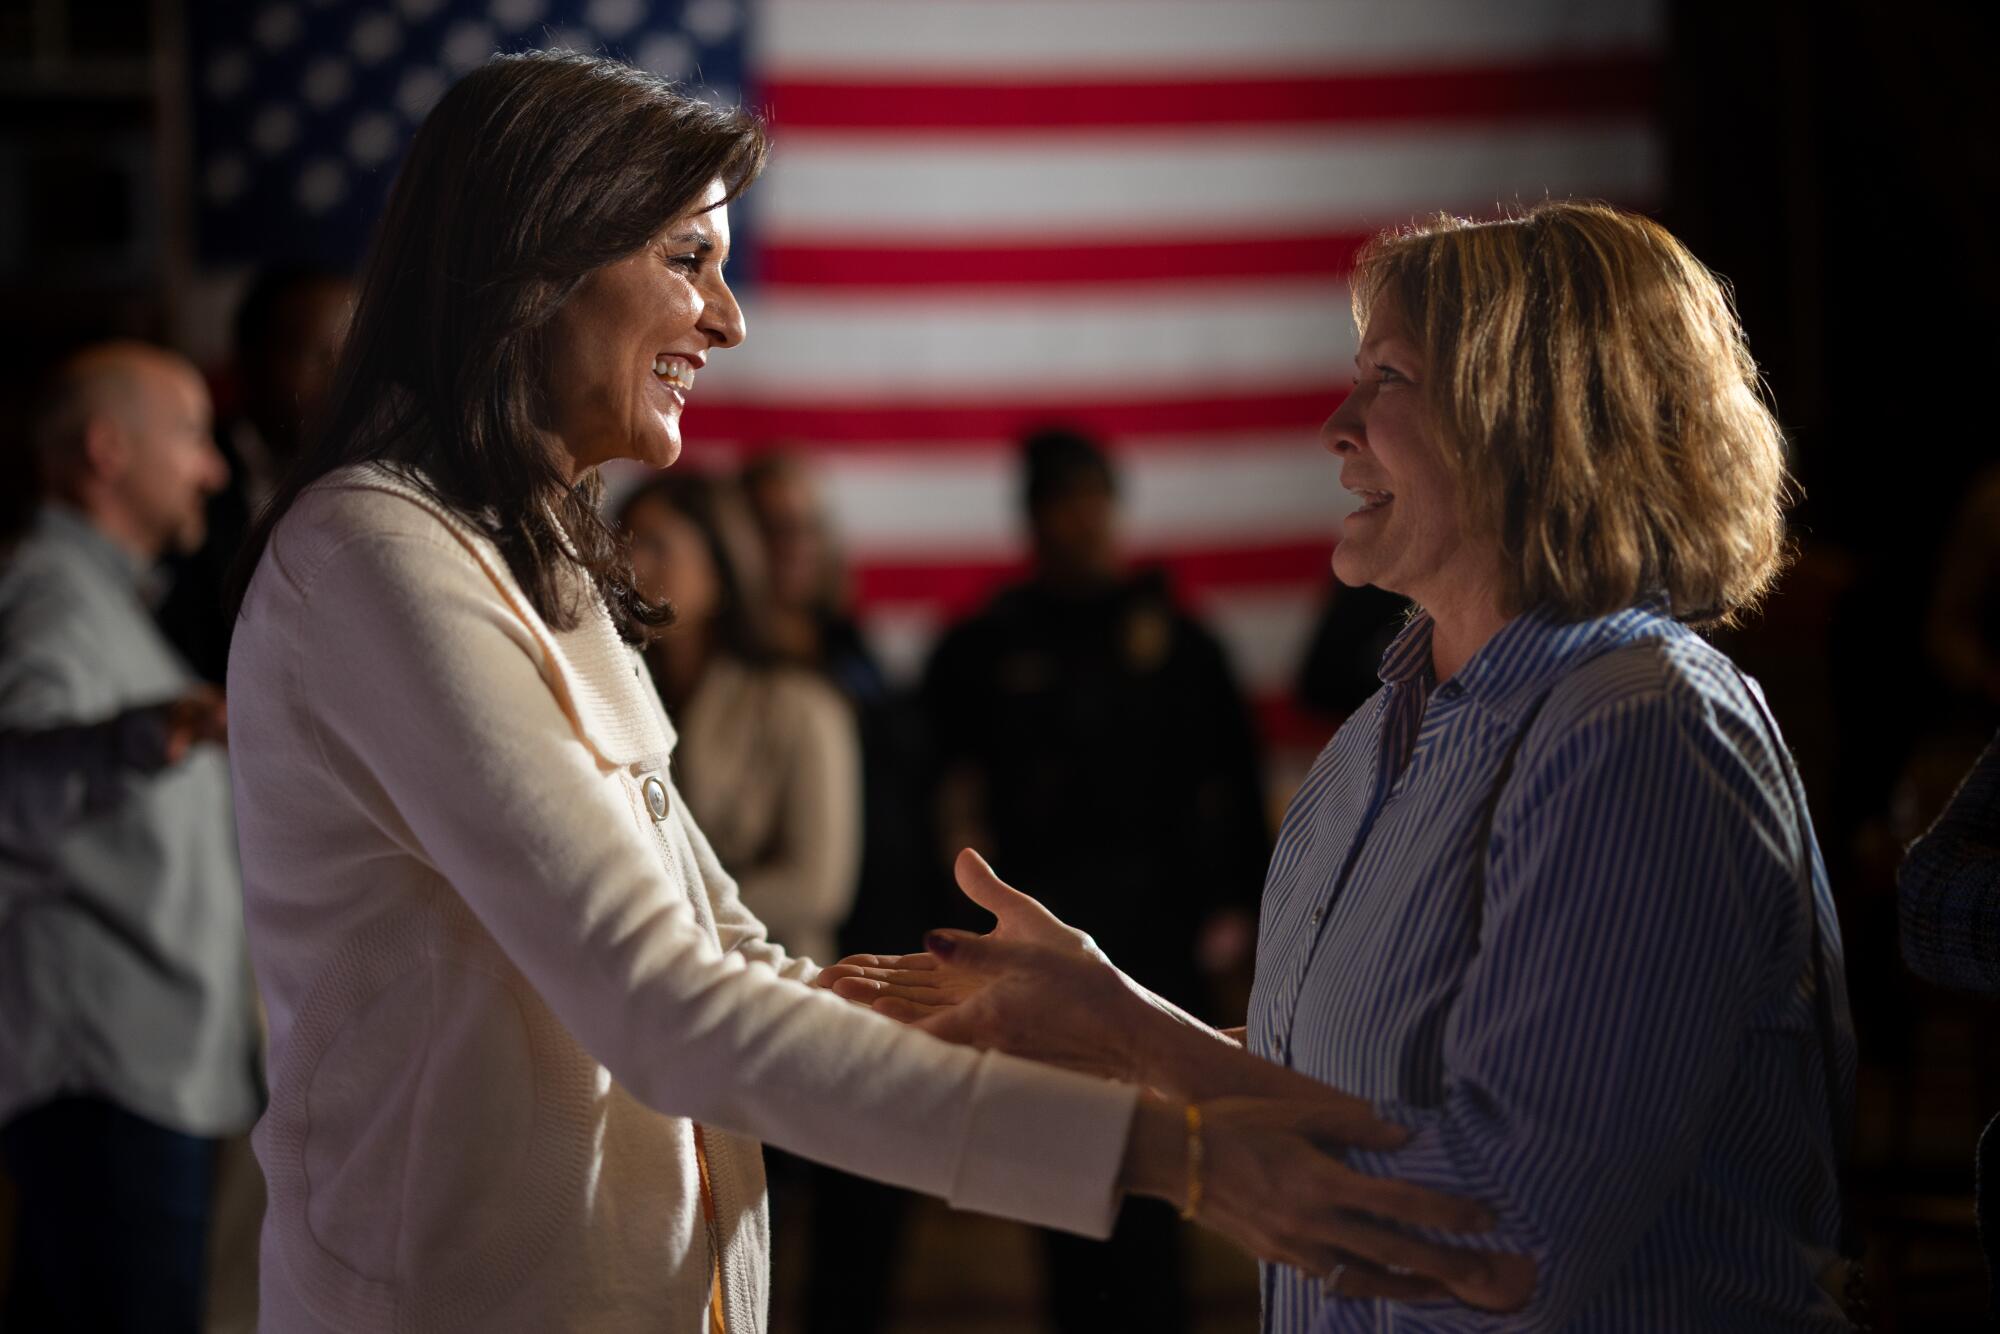 Nikki Haley reaches out to shake hands with a woman